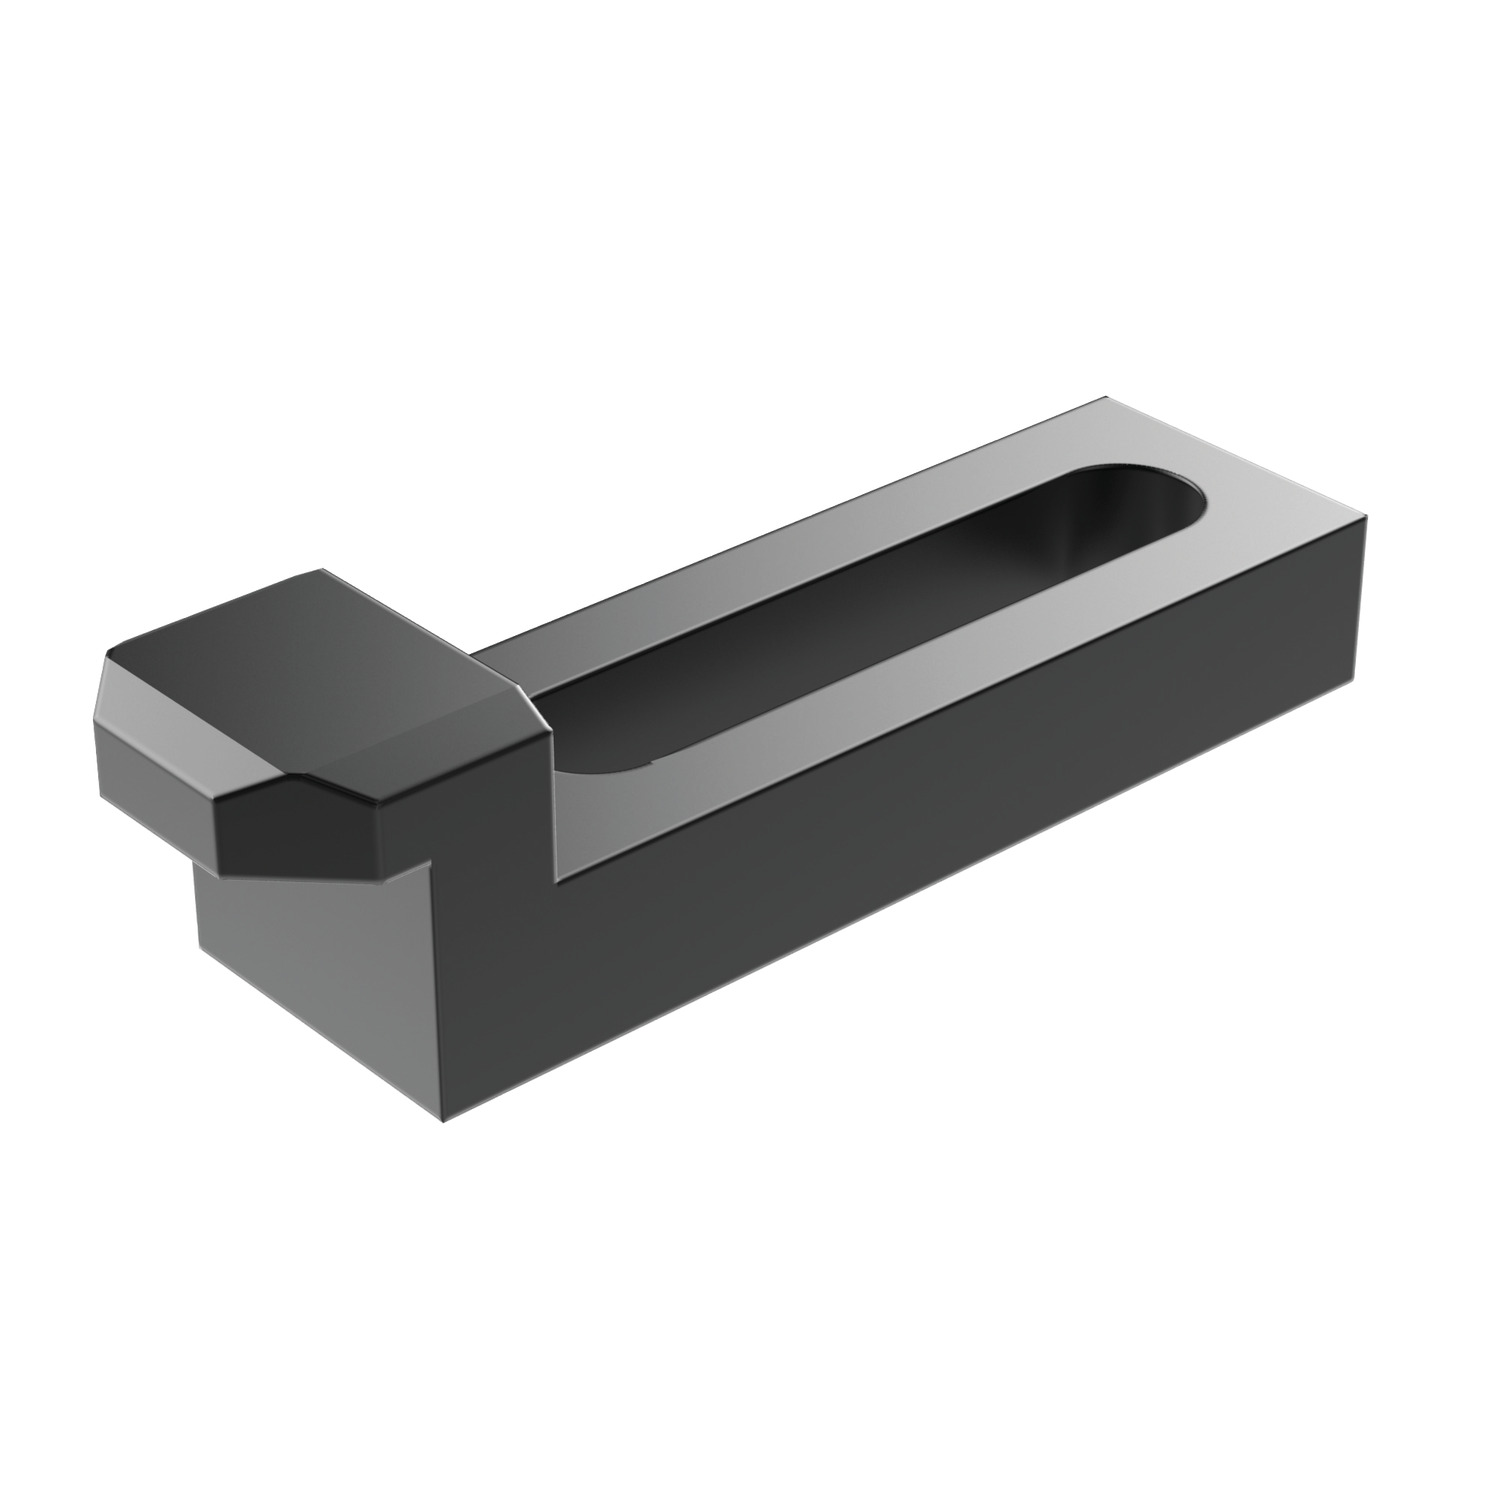 Product 10210, Stepped Clamps long slot / 